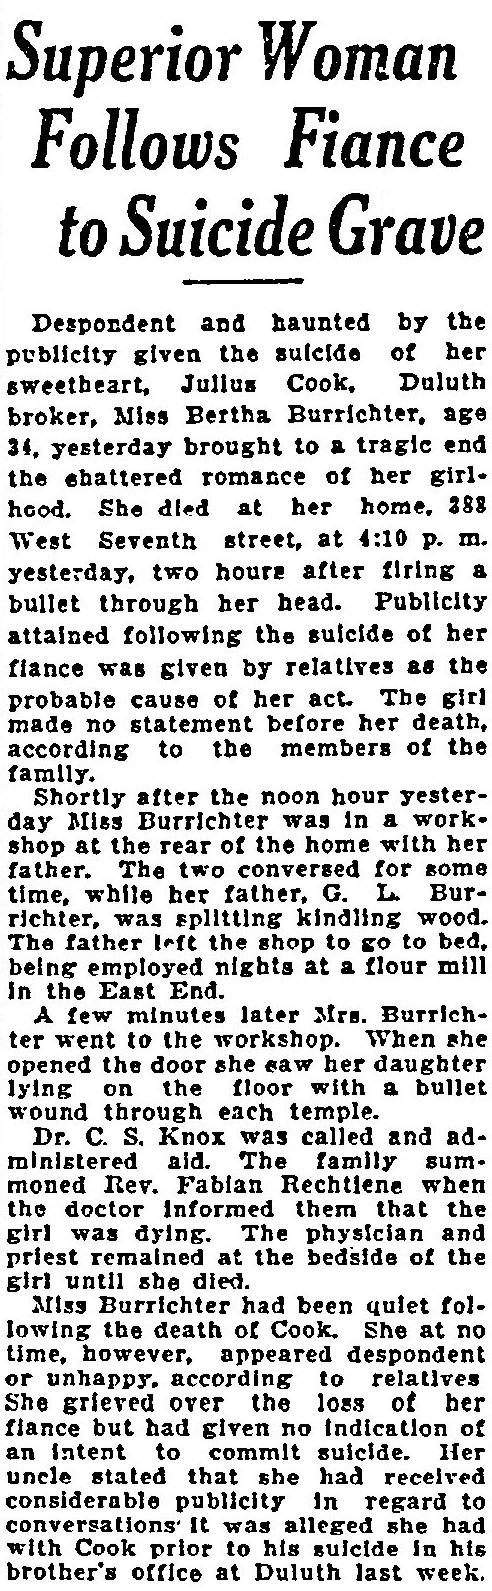 Superior woman follows fiance to suicide grave - 25Aug1921